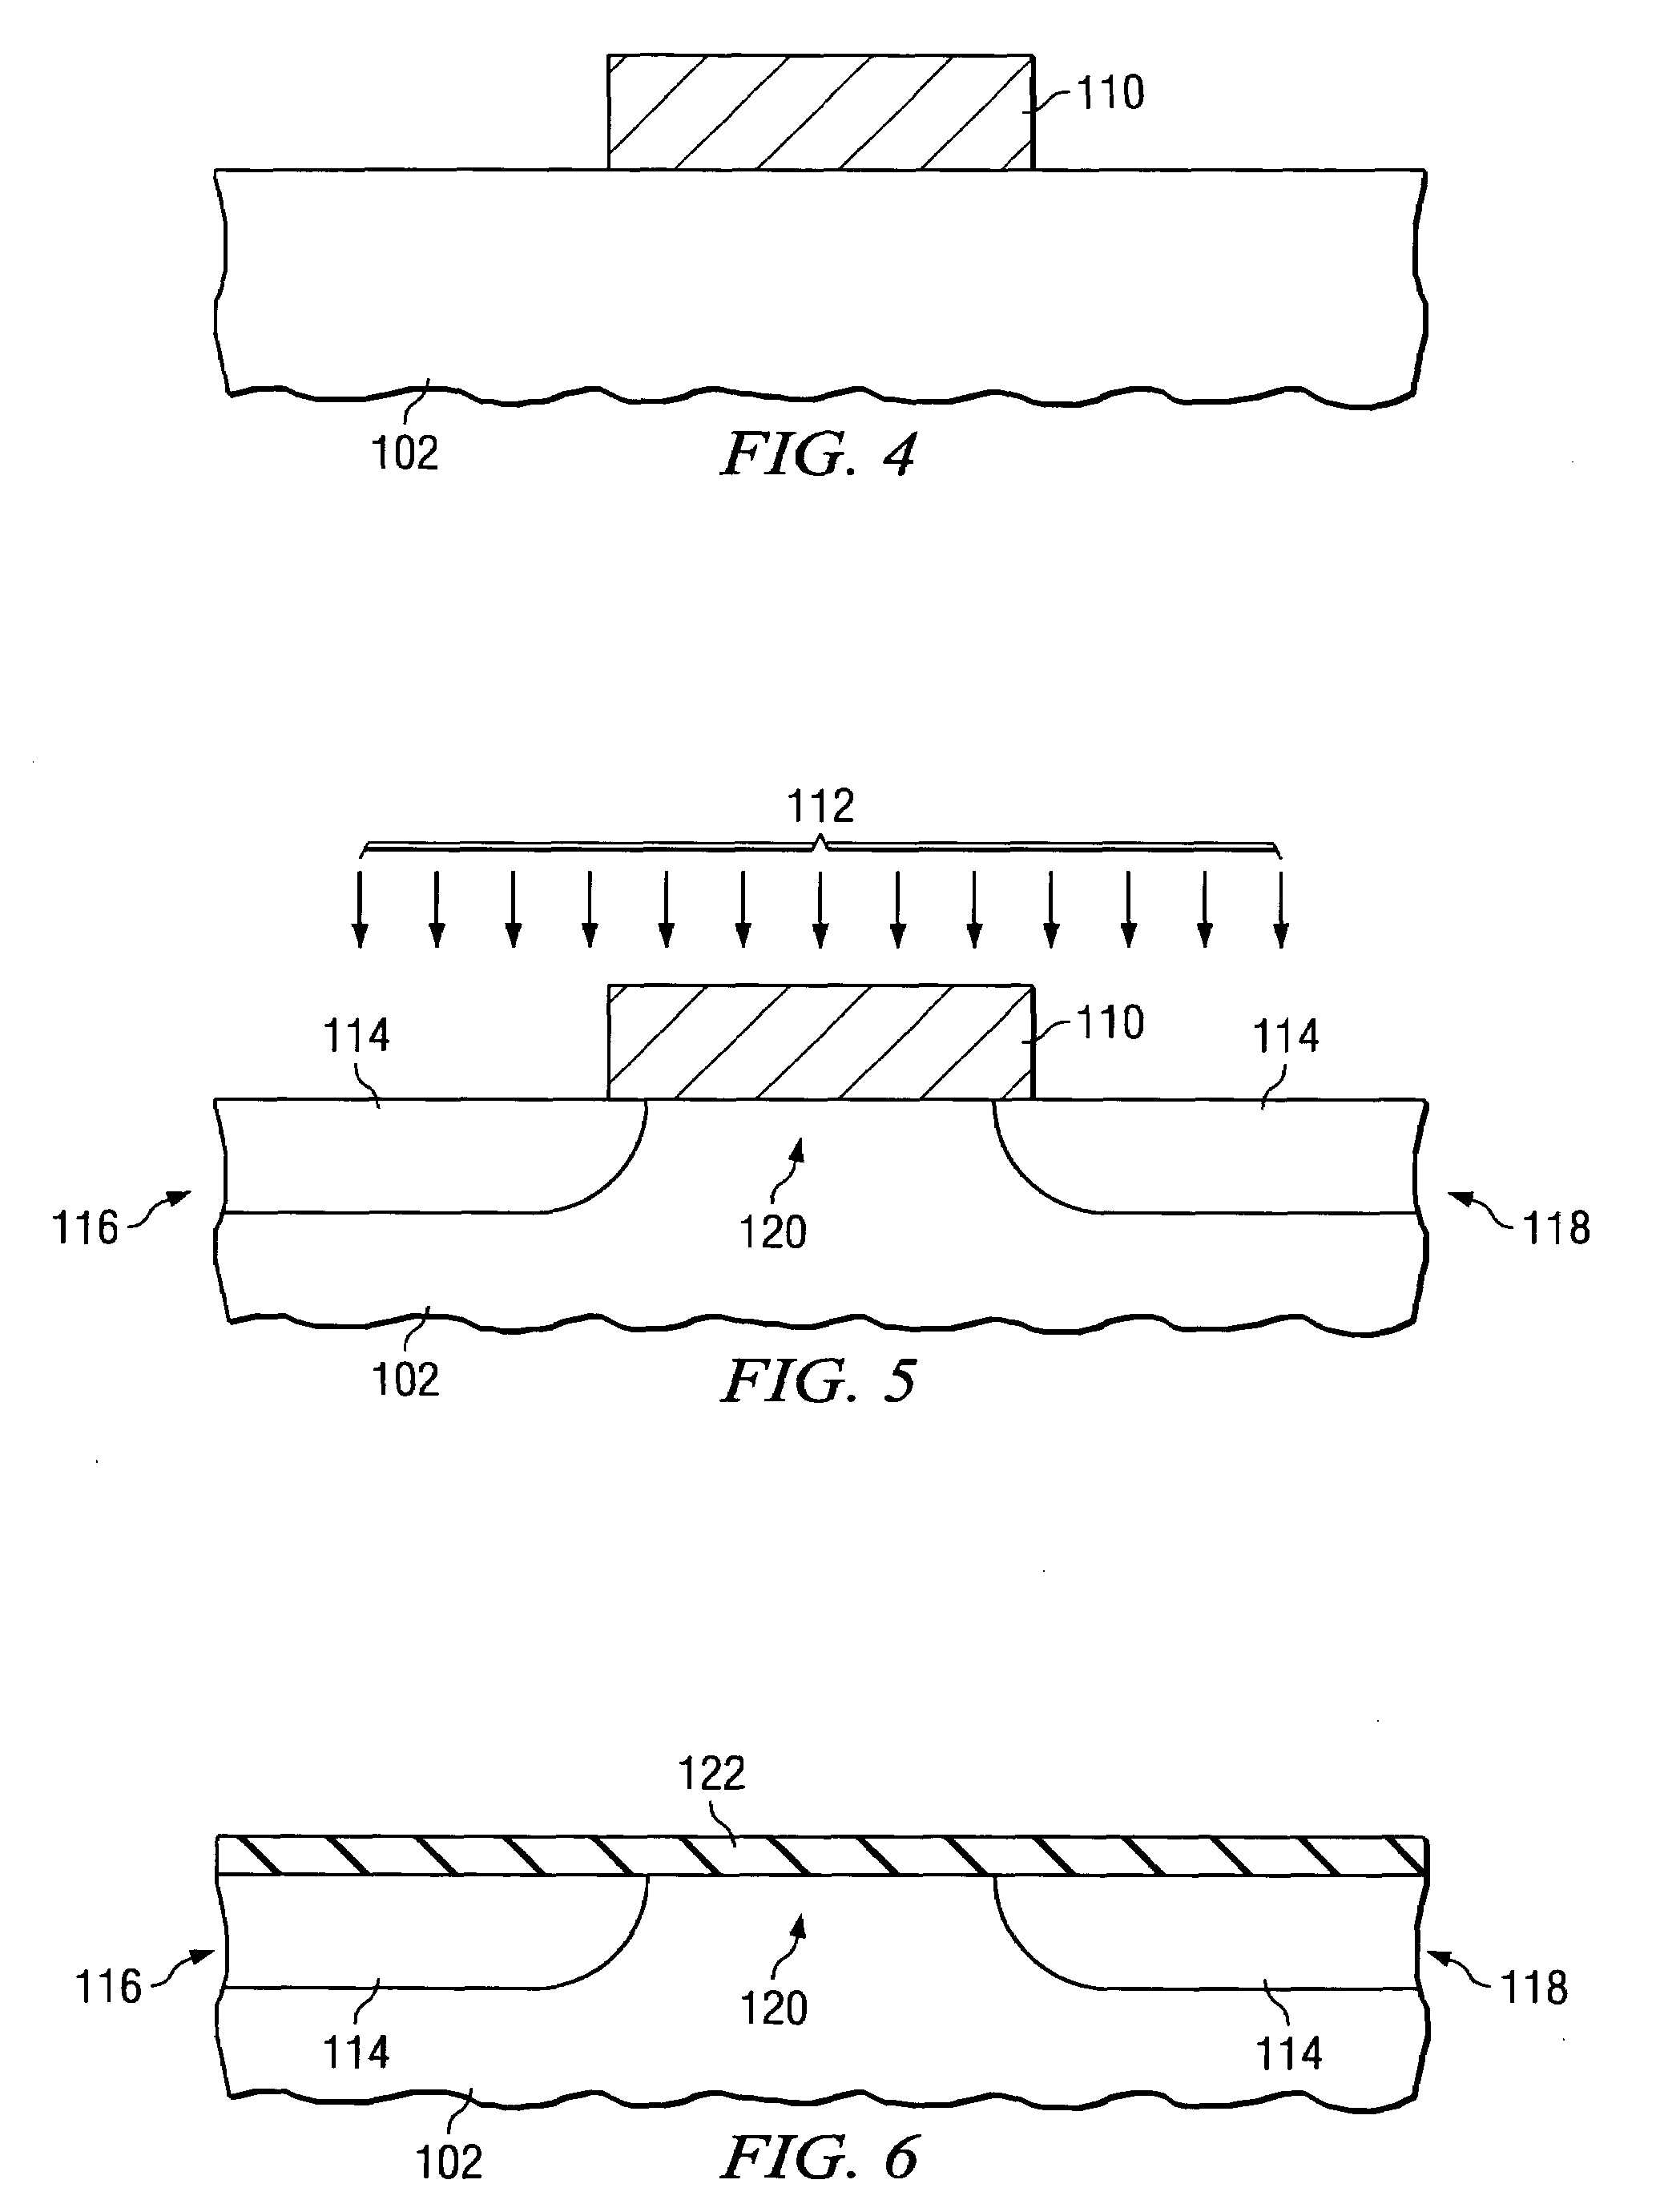 Fabrication of an OTP-EPROM having reduced leakage current